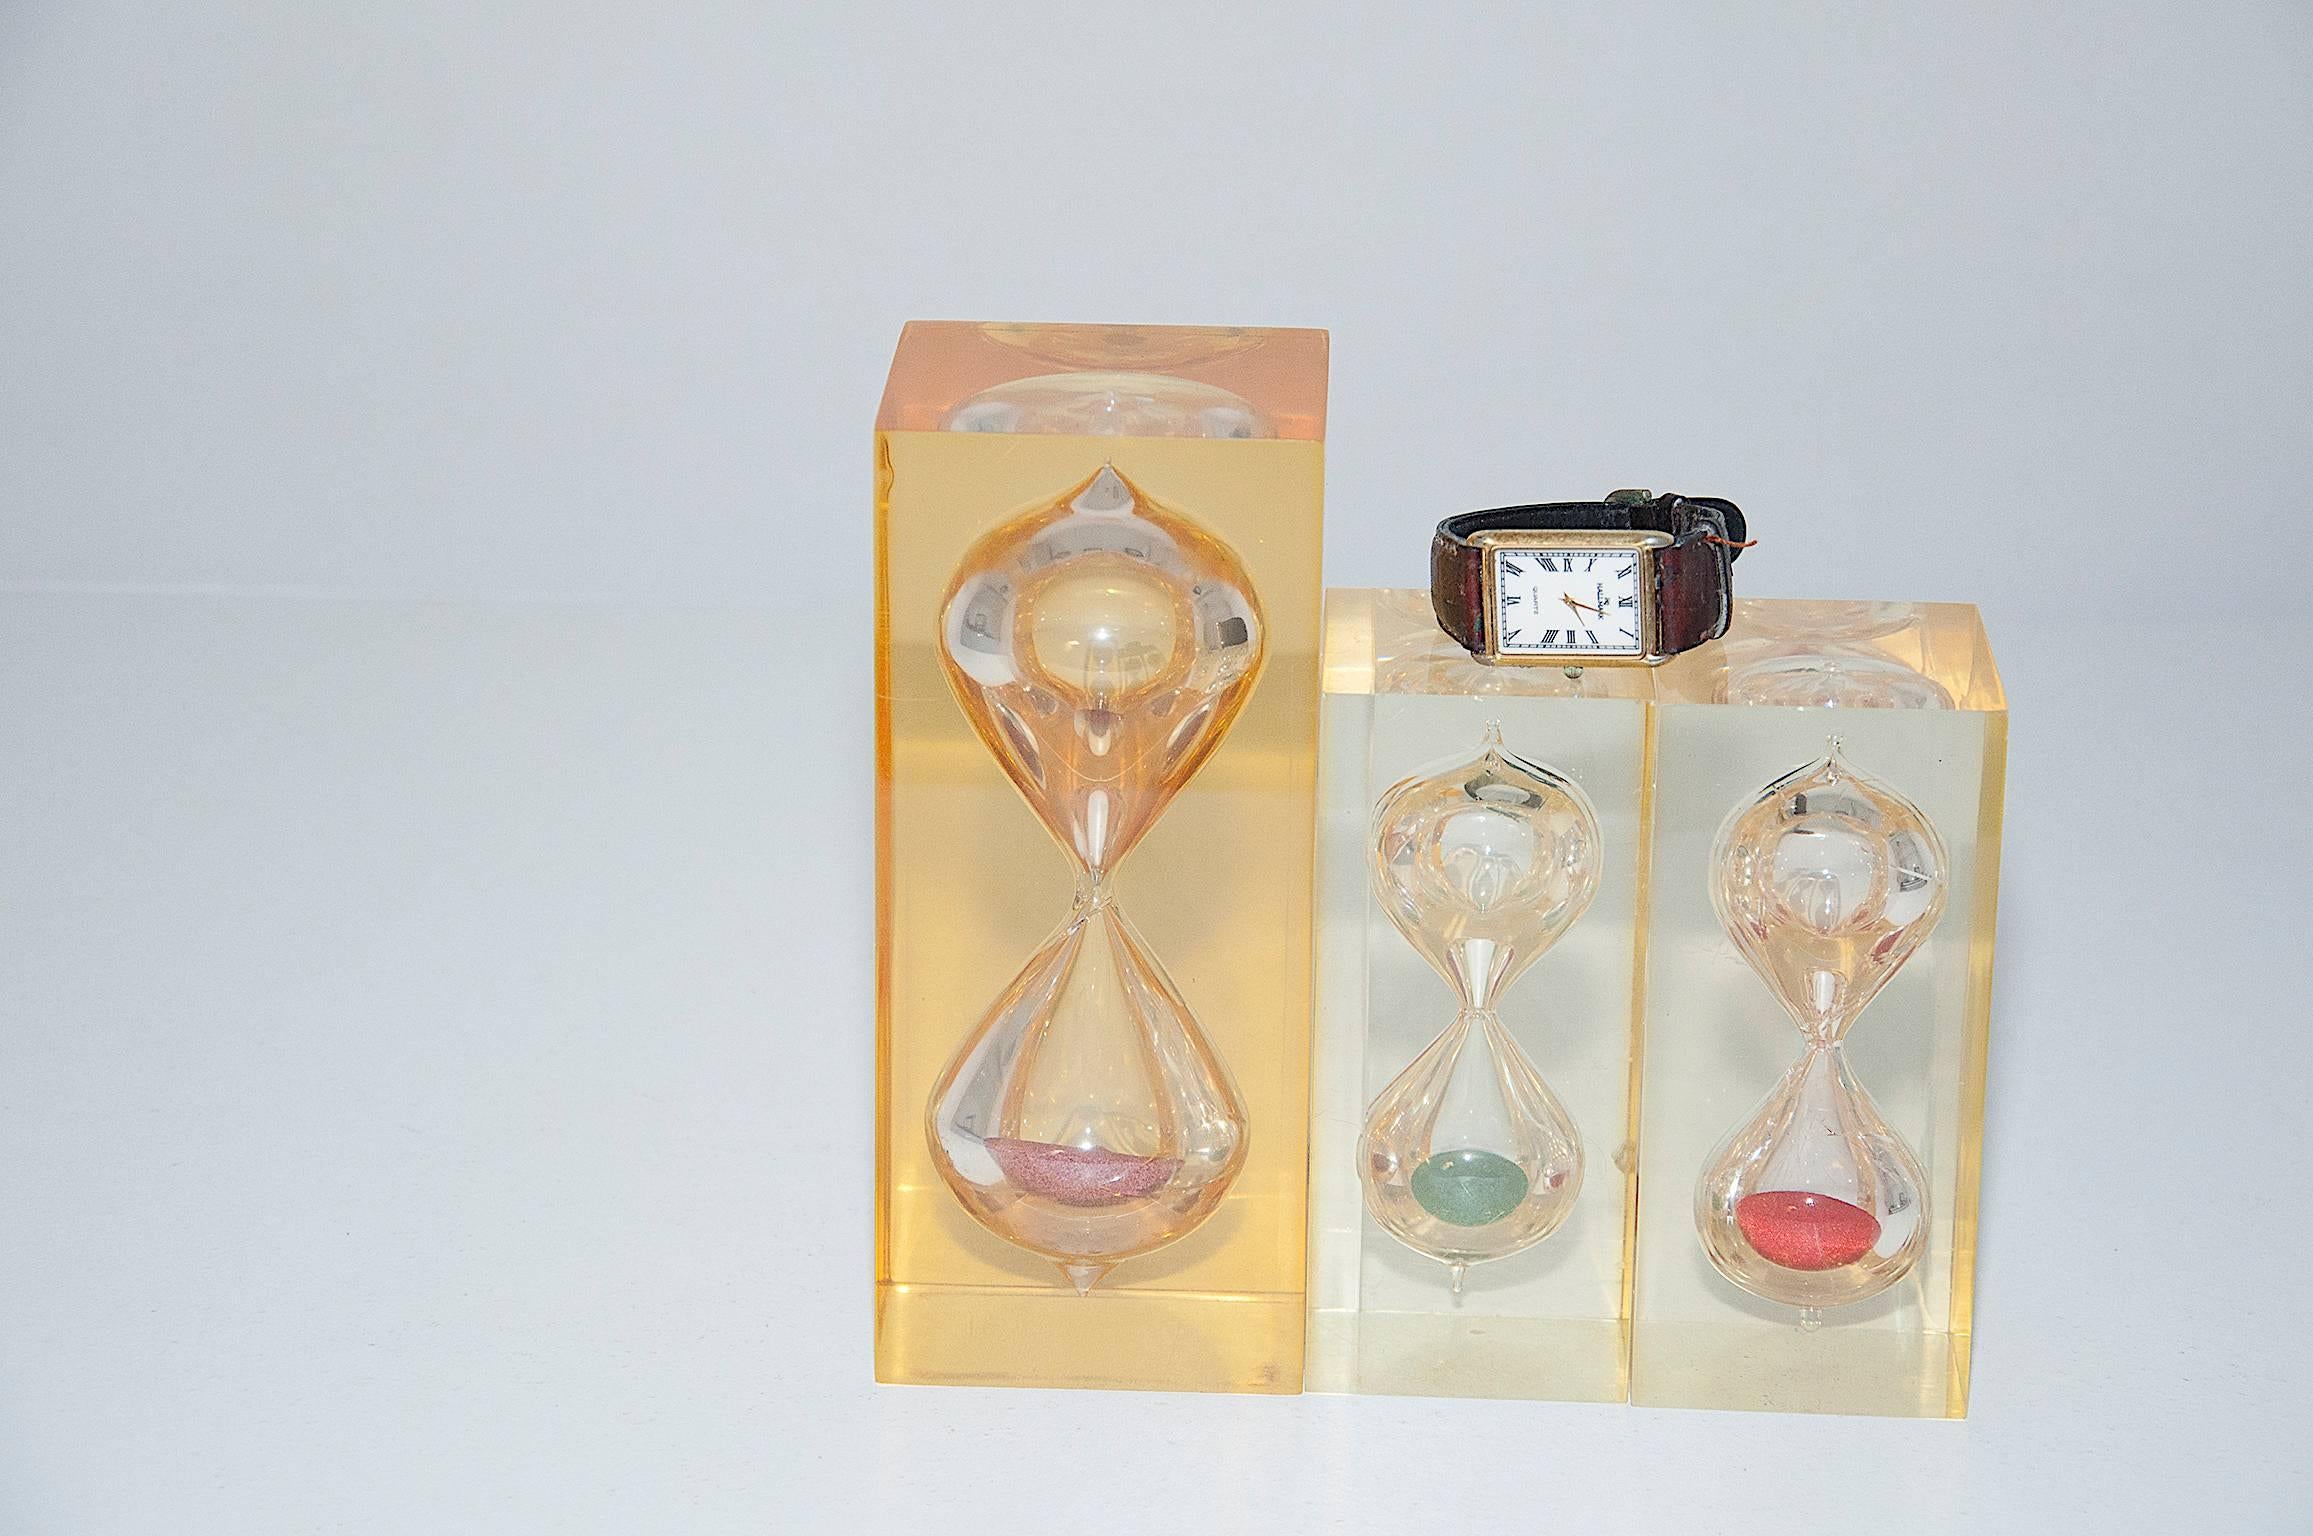 The set is composed of three resin sculptures with an HourGlass inside. The French artist Pierre Giraudon, probably did it in the period 1970-1980.
The biggest is 20 cm high and the two others 14cm high.
One is in orange-yellow colors, the others